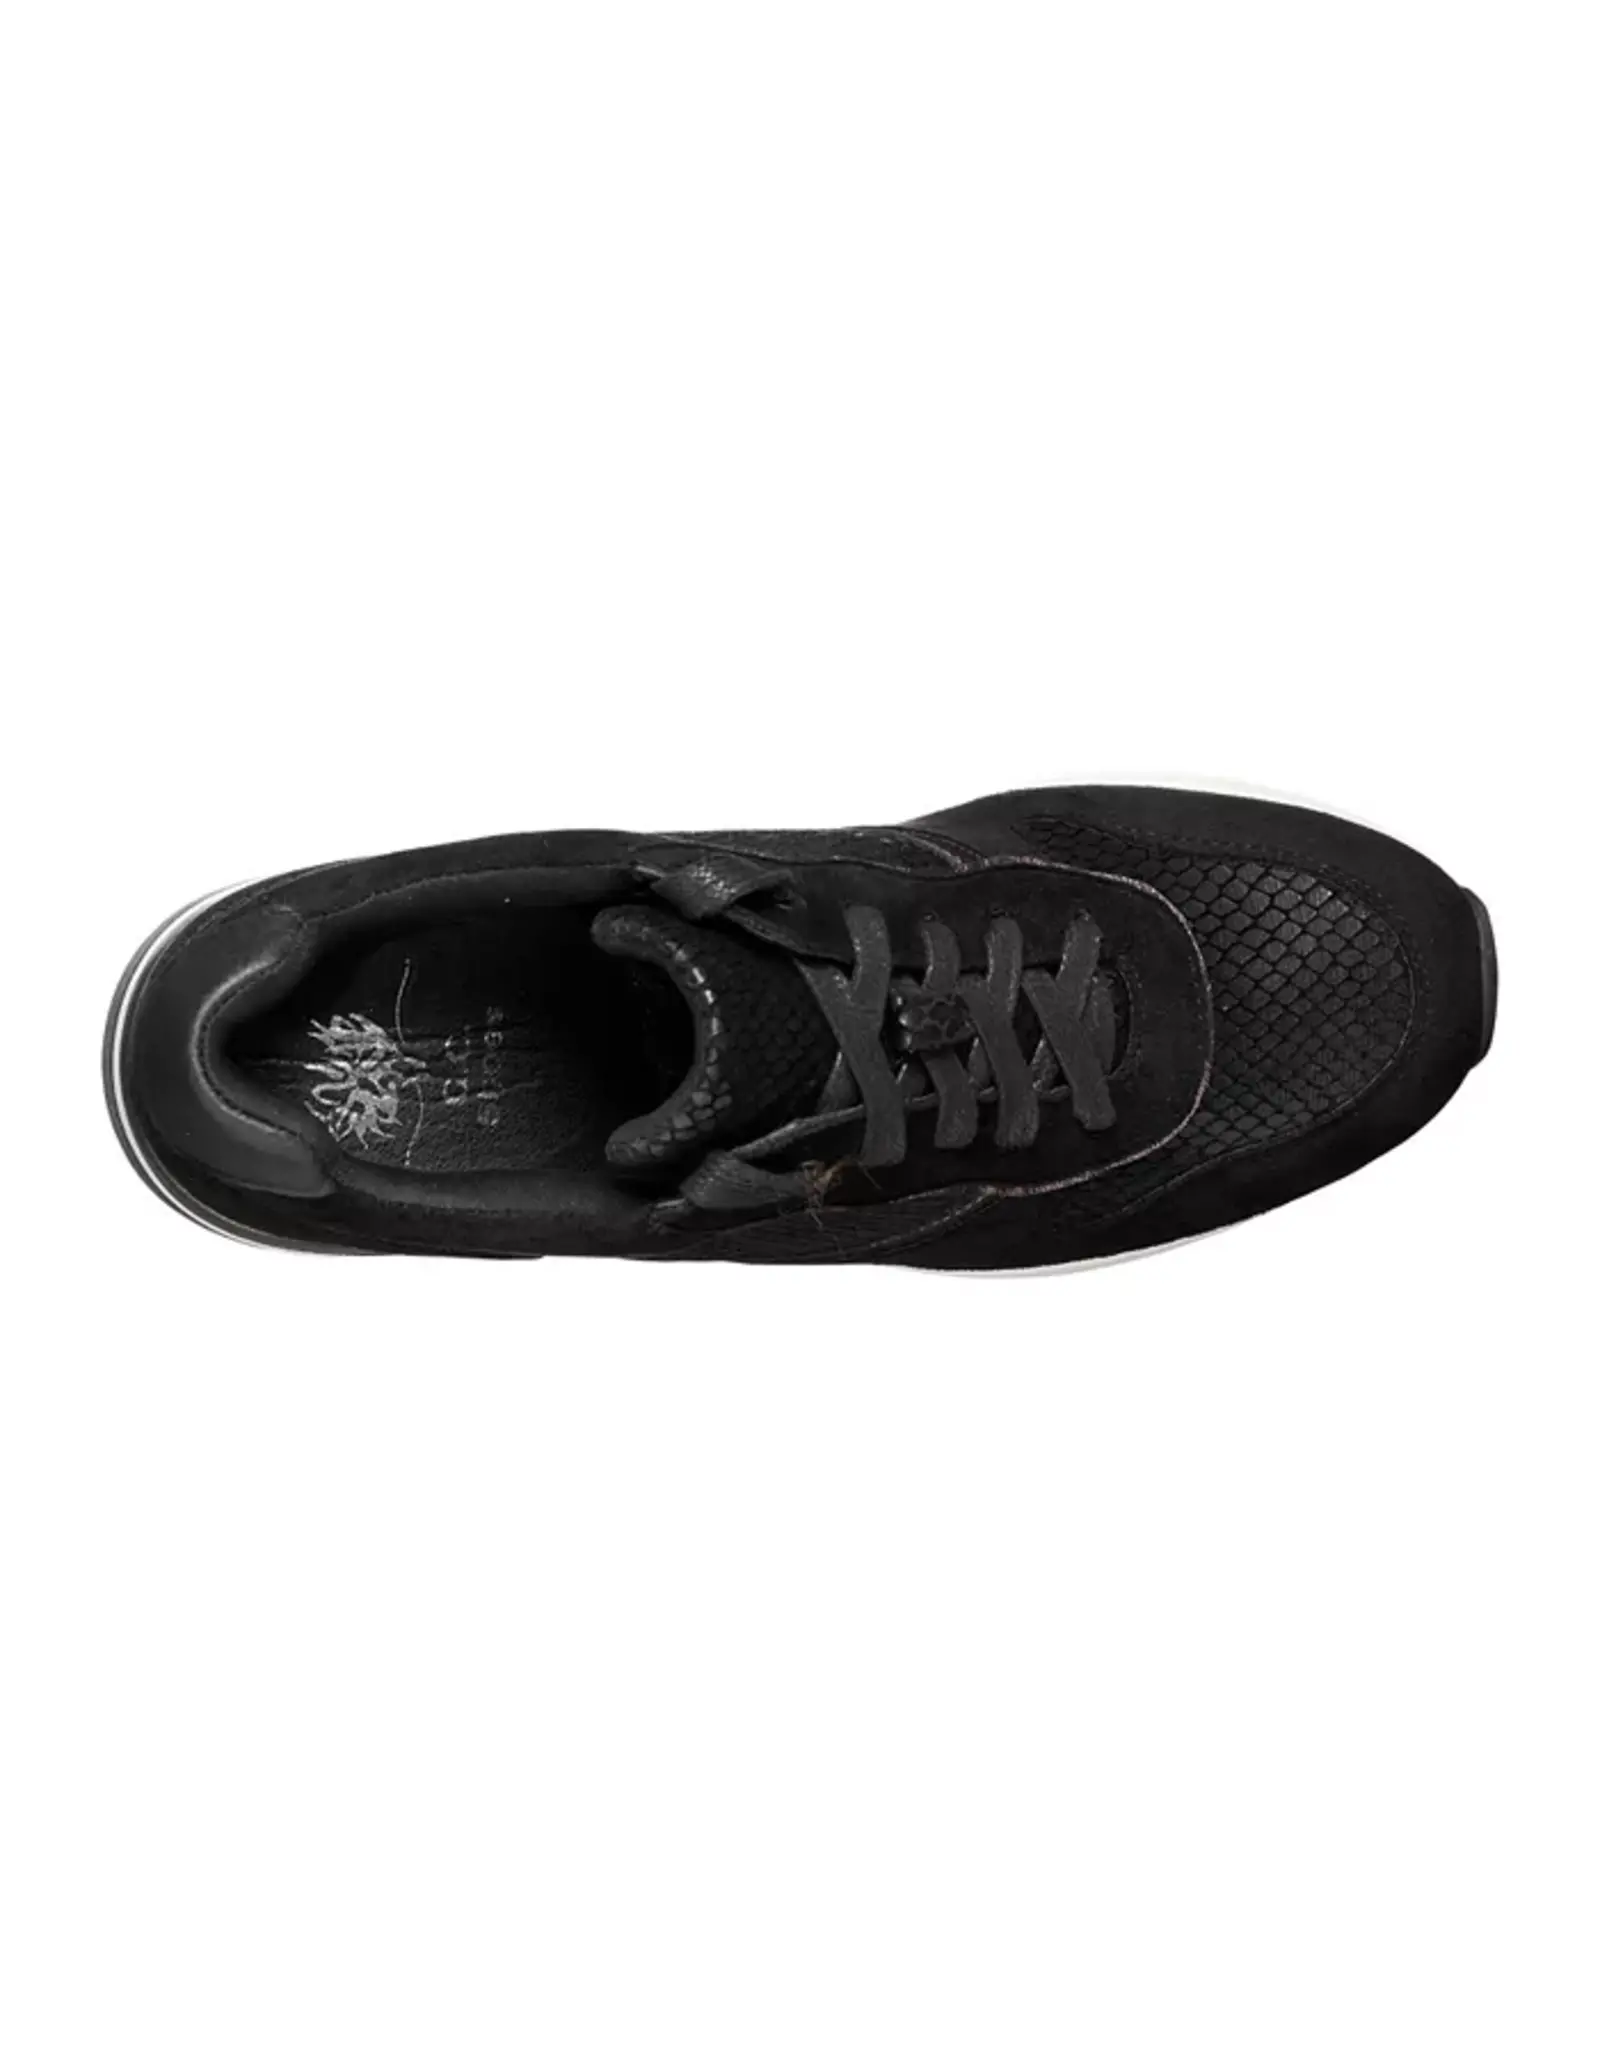 Canali Reptile Wedge Sneaker Lace Up